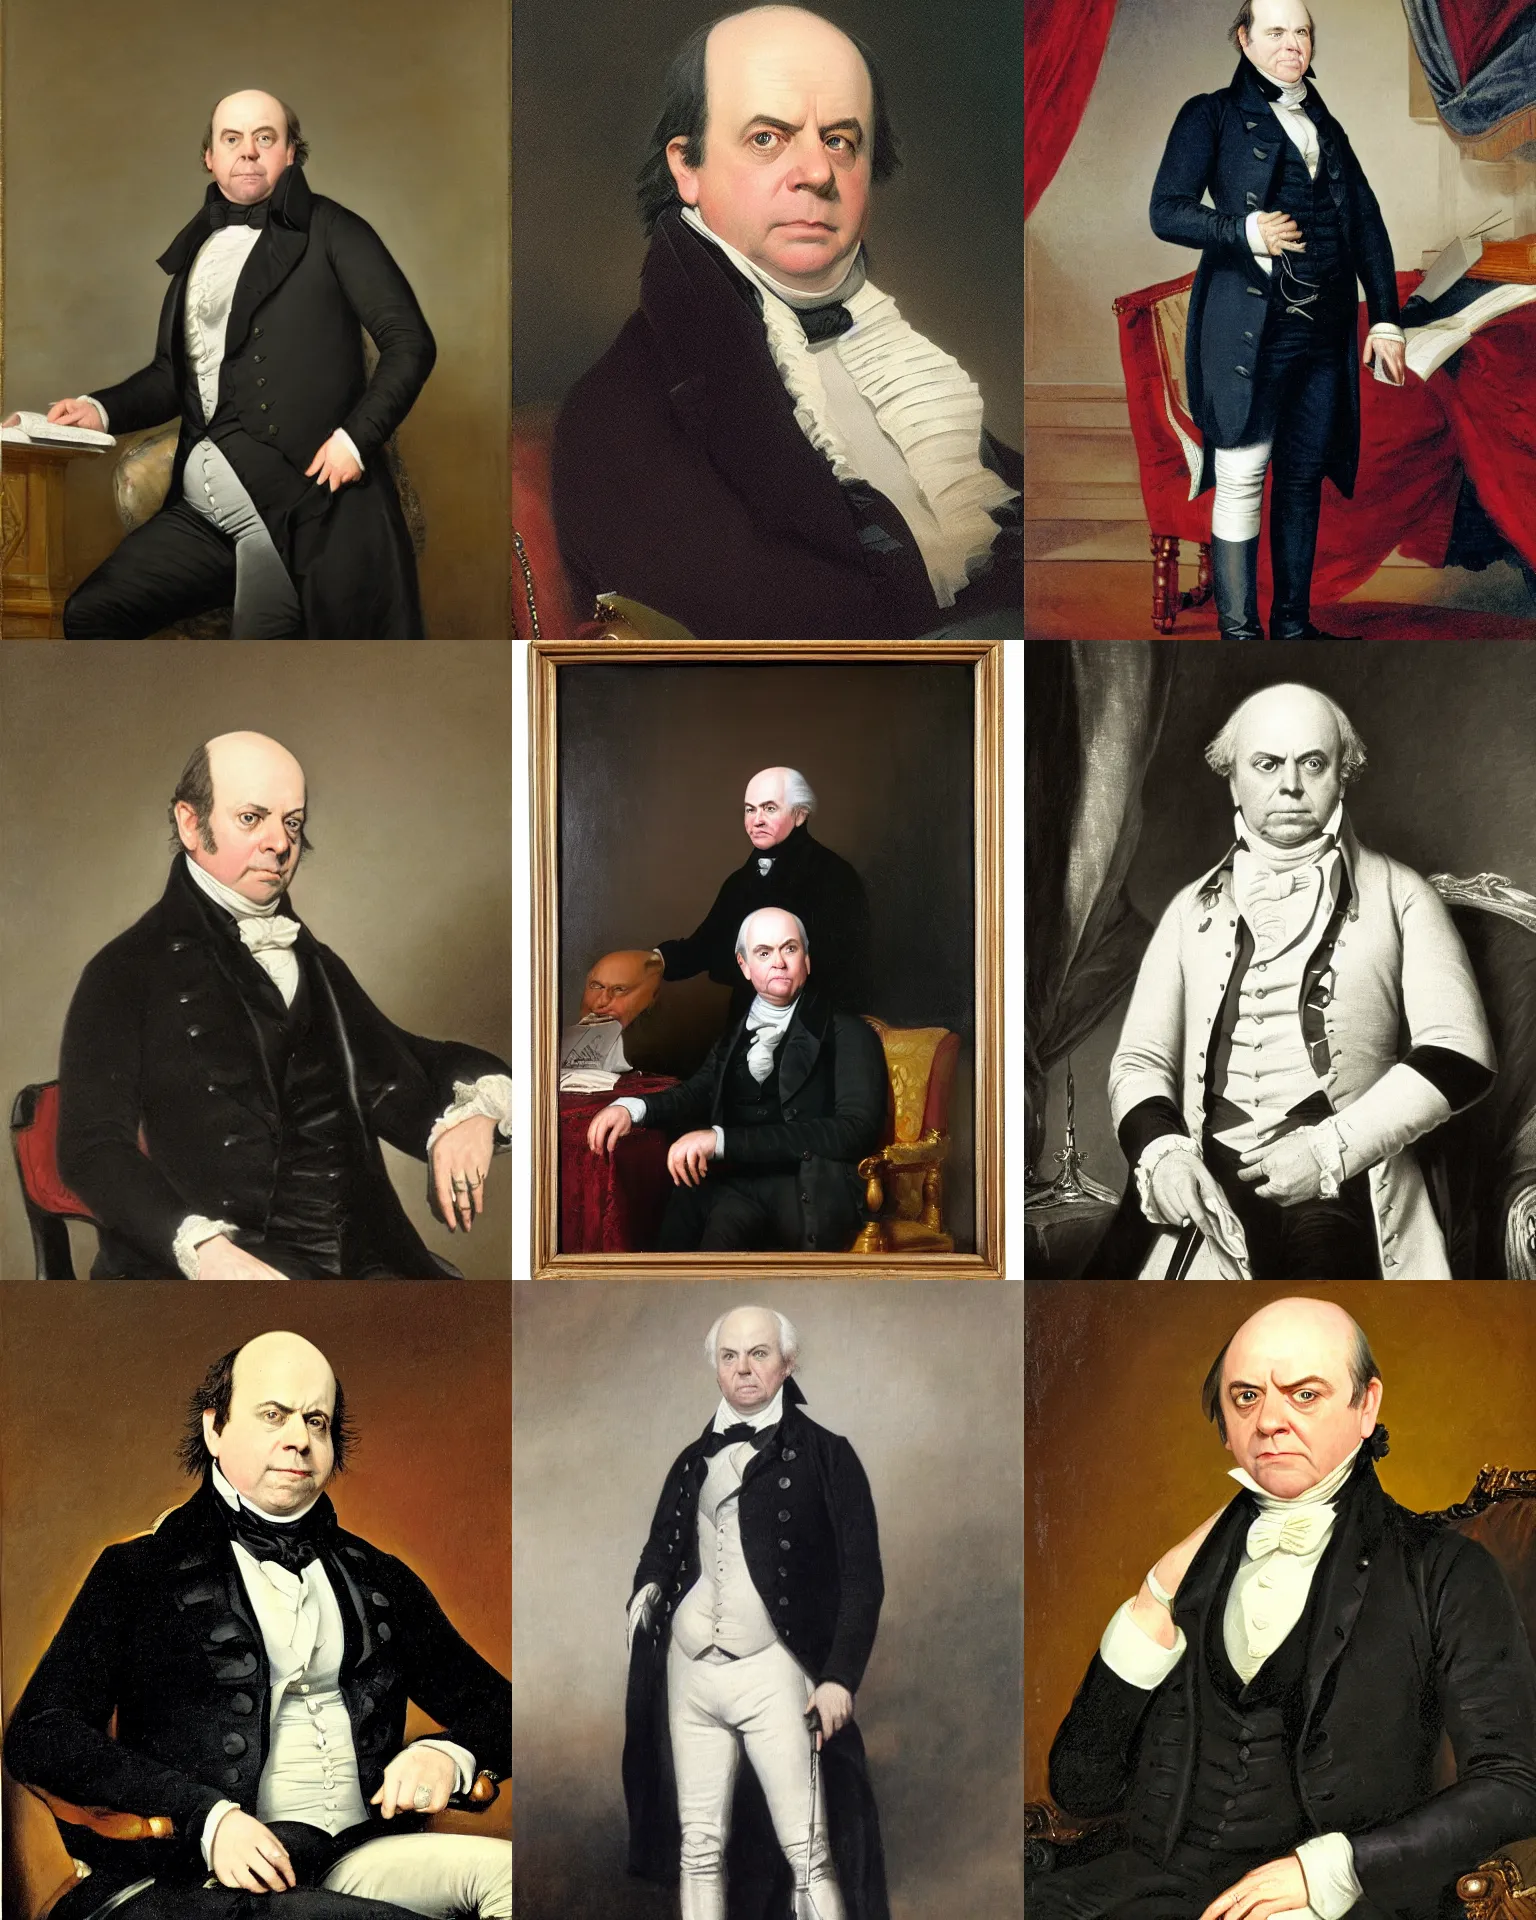 Prompt: paul giamatti as john quincy adams, 6 th president of the united states, 1 8 2 5 - 1 8 2 9, portrait by george peter alexander healy in 1 8 5 8. oil on canvas, 6 2 x 4 7 inches, white house collection / white house historical association